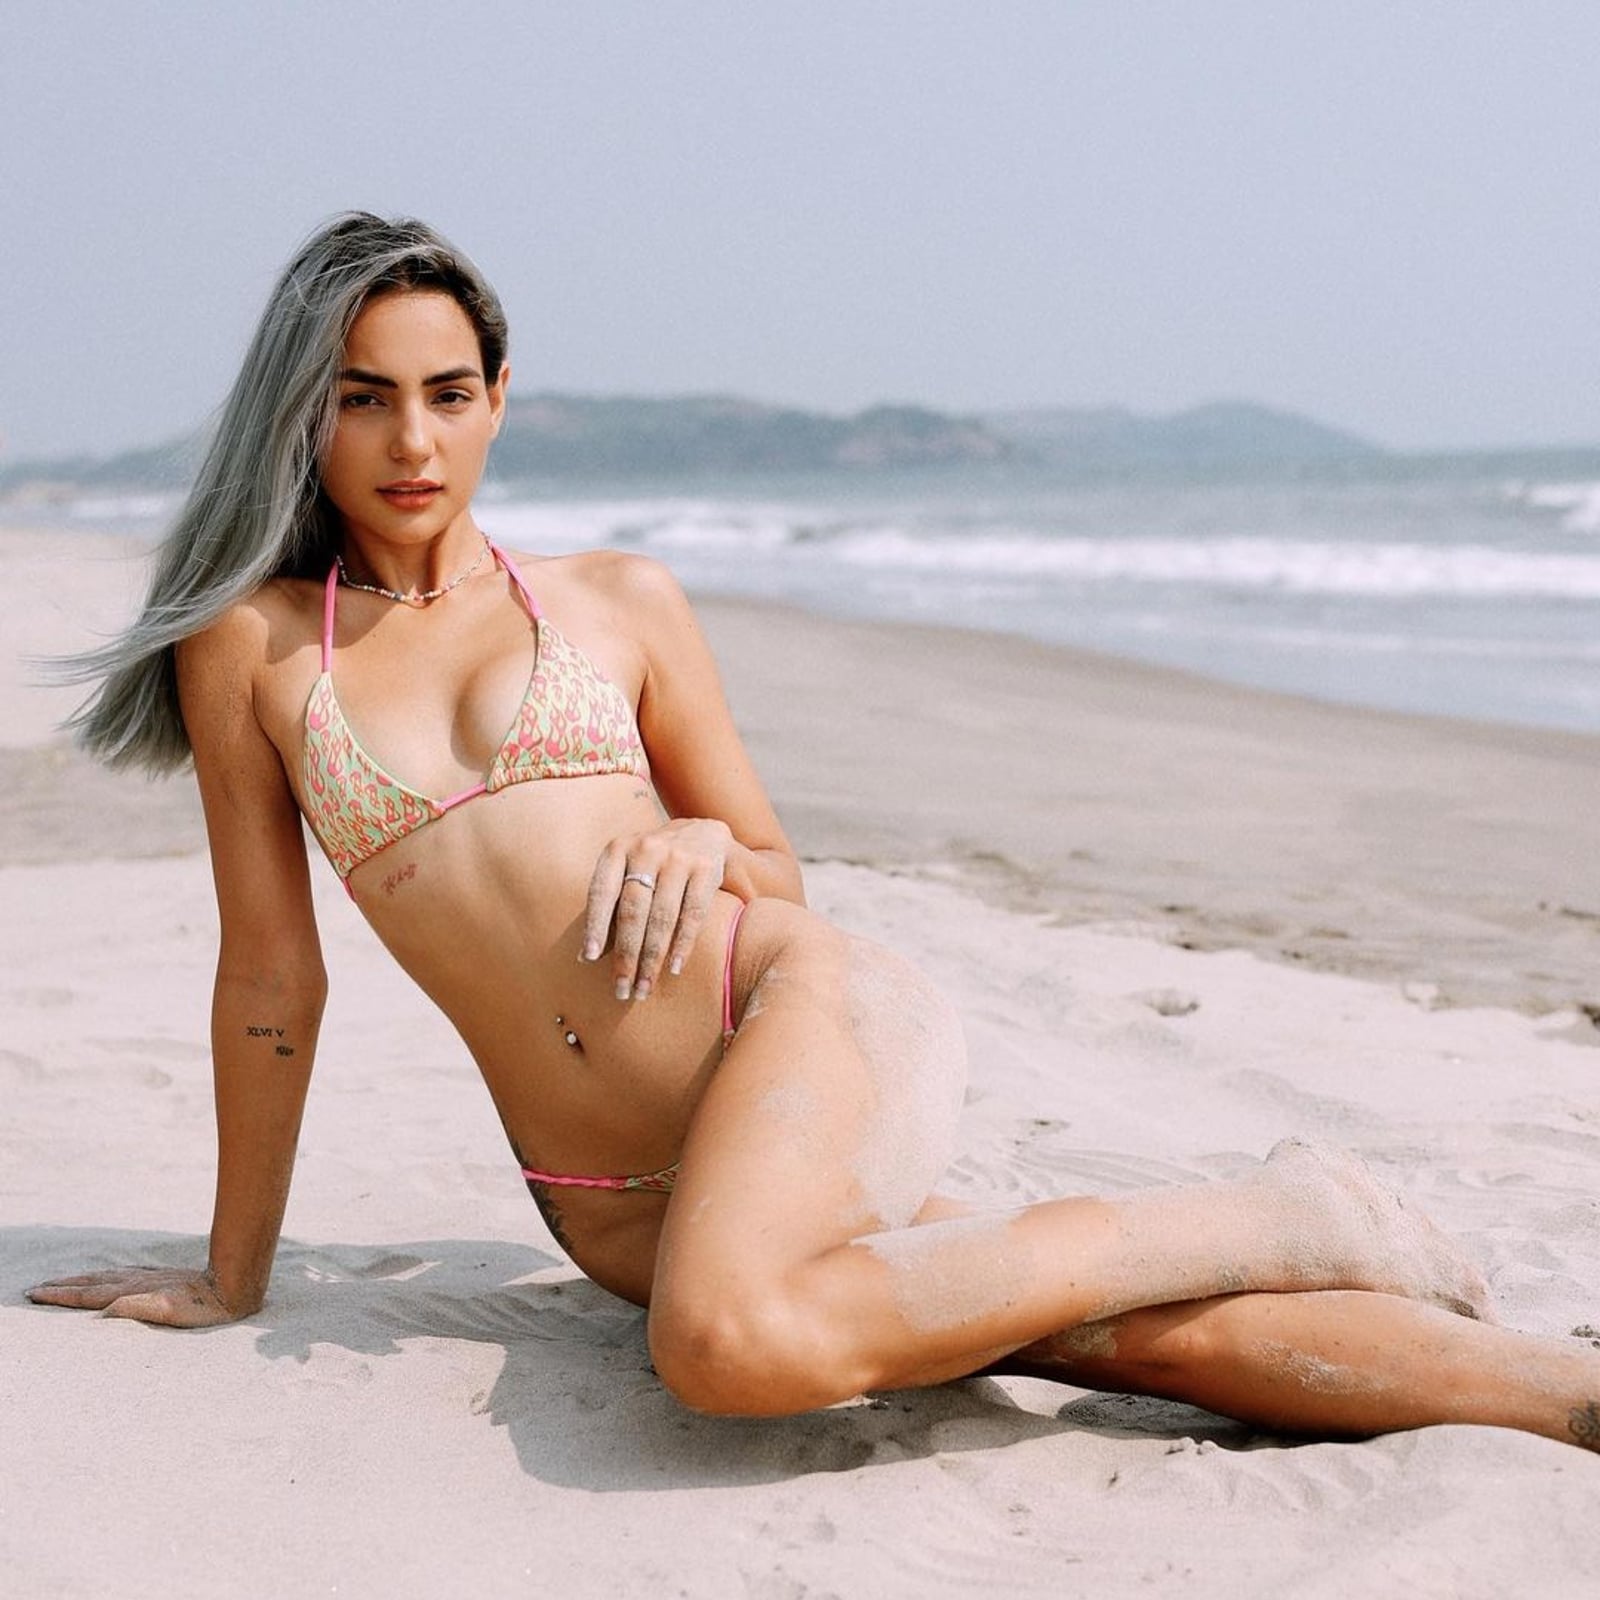 Kat Kristian Flaunts Her Sexy Curves In Bikinis, Take a Look At Diva's Sultry Photos